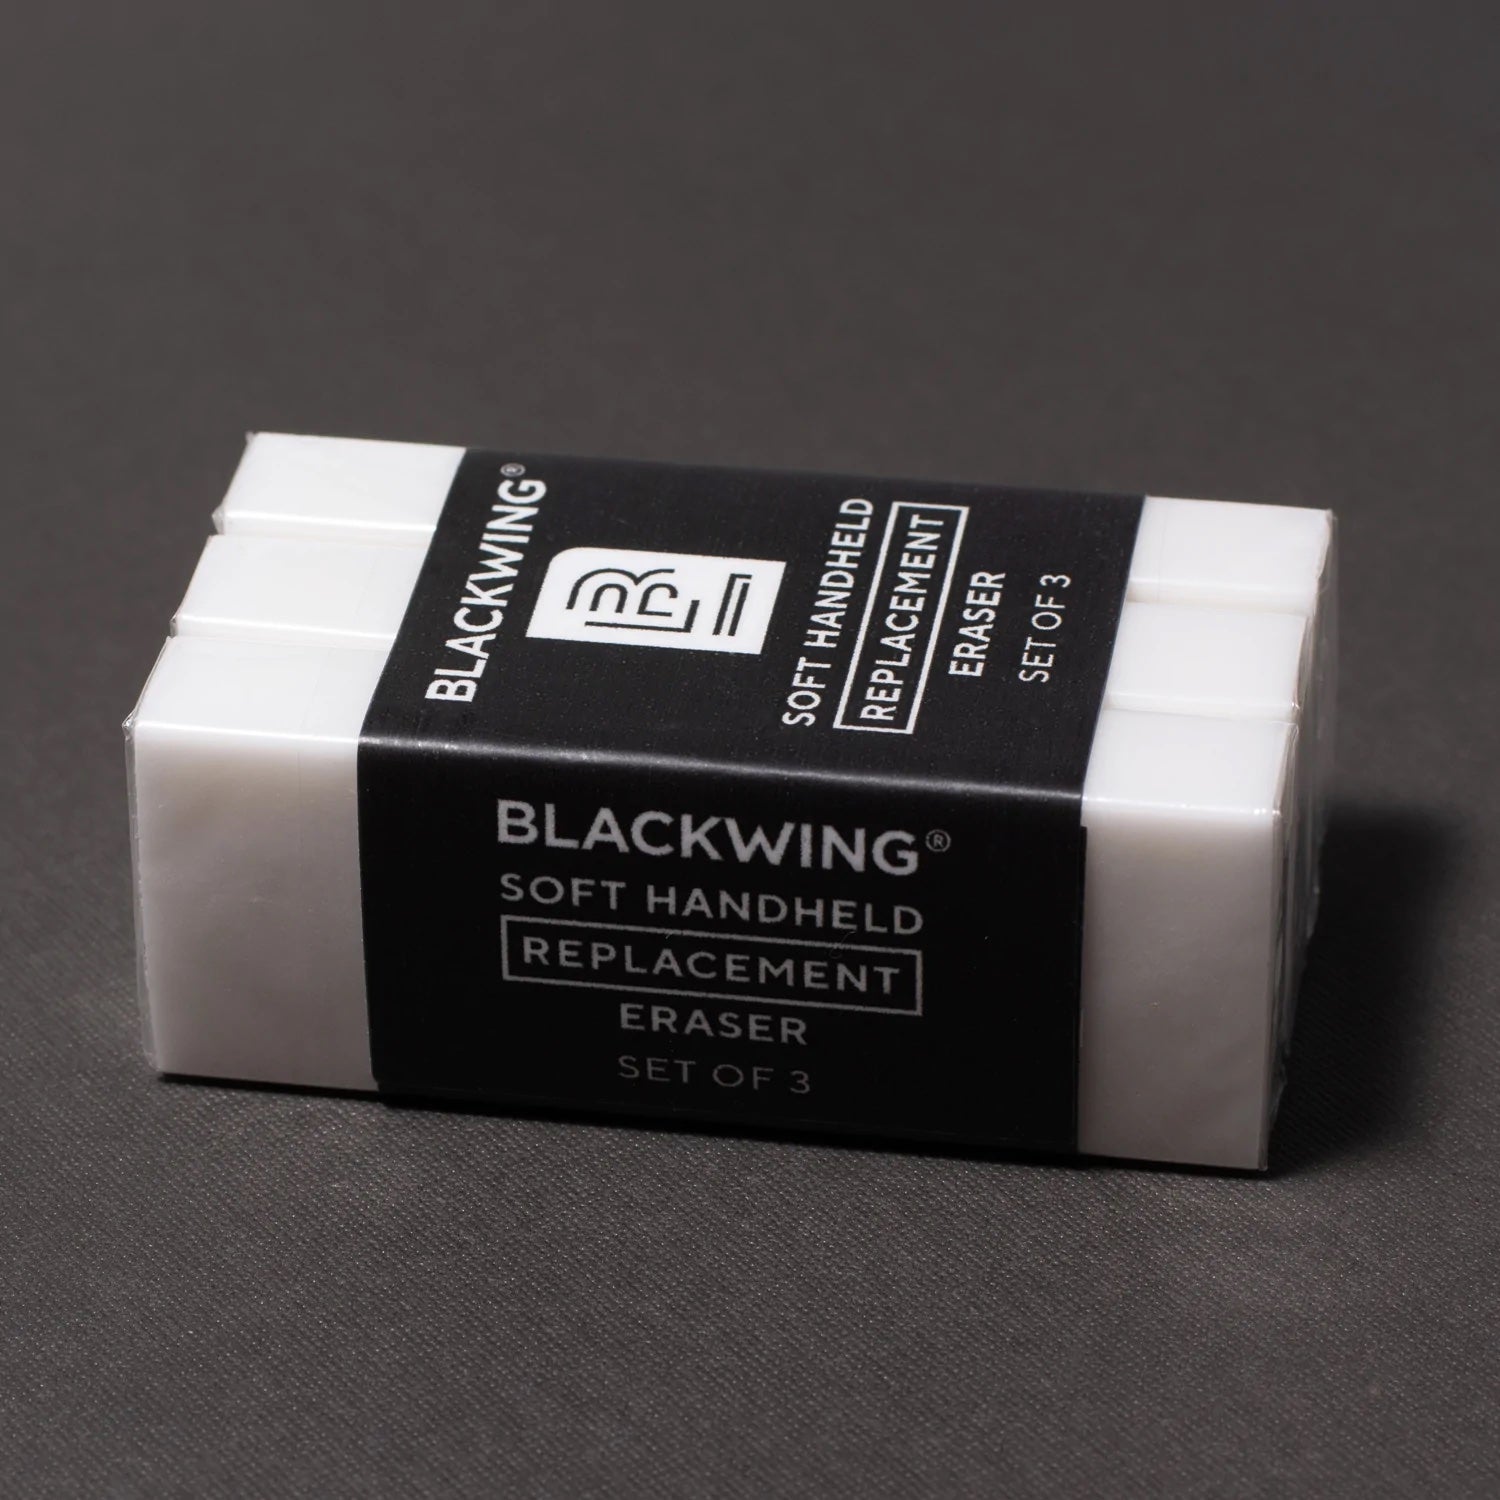 Blackwing Volume 20 Limited Edition Pencils - Firm - Box of 12